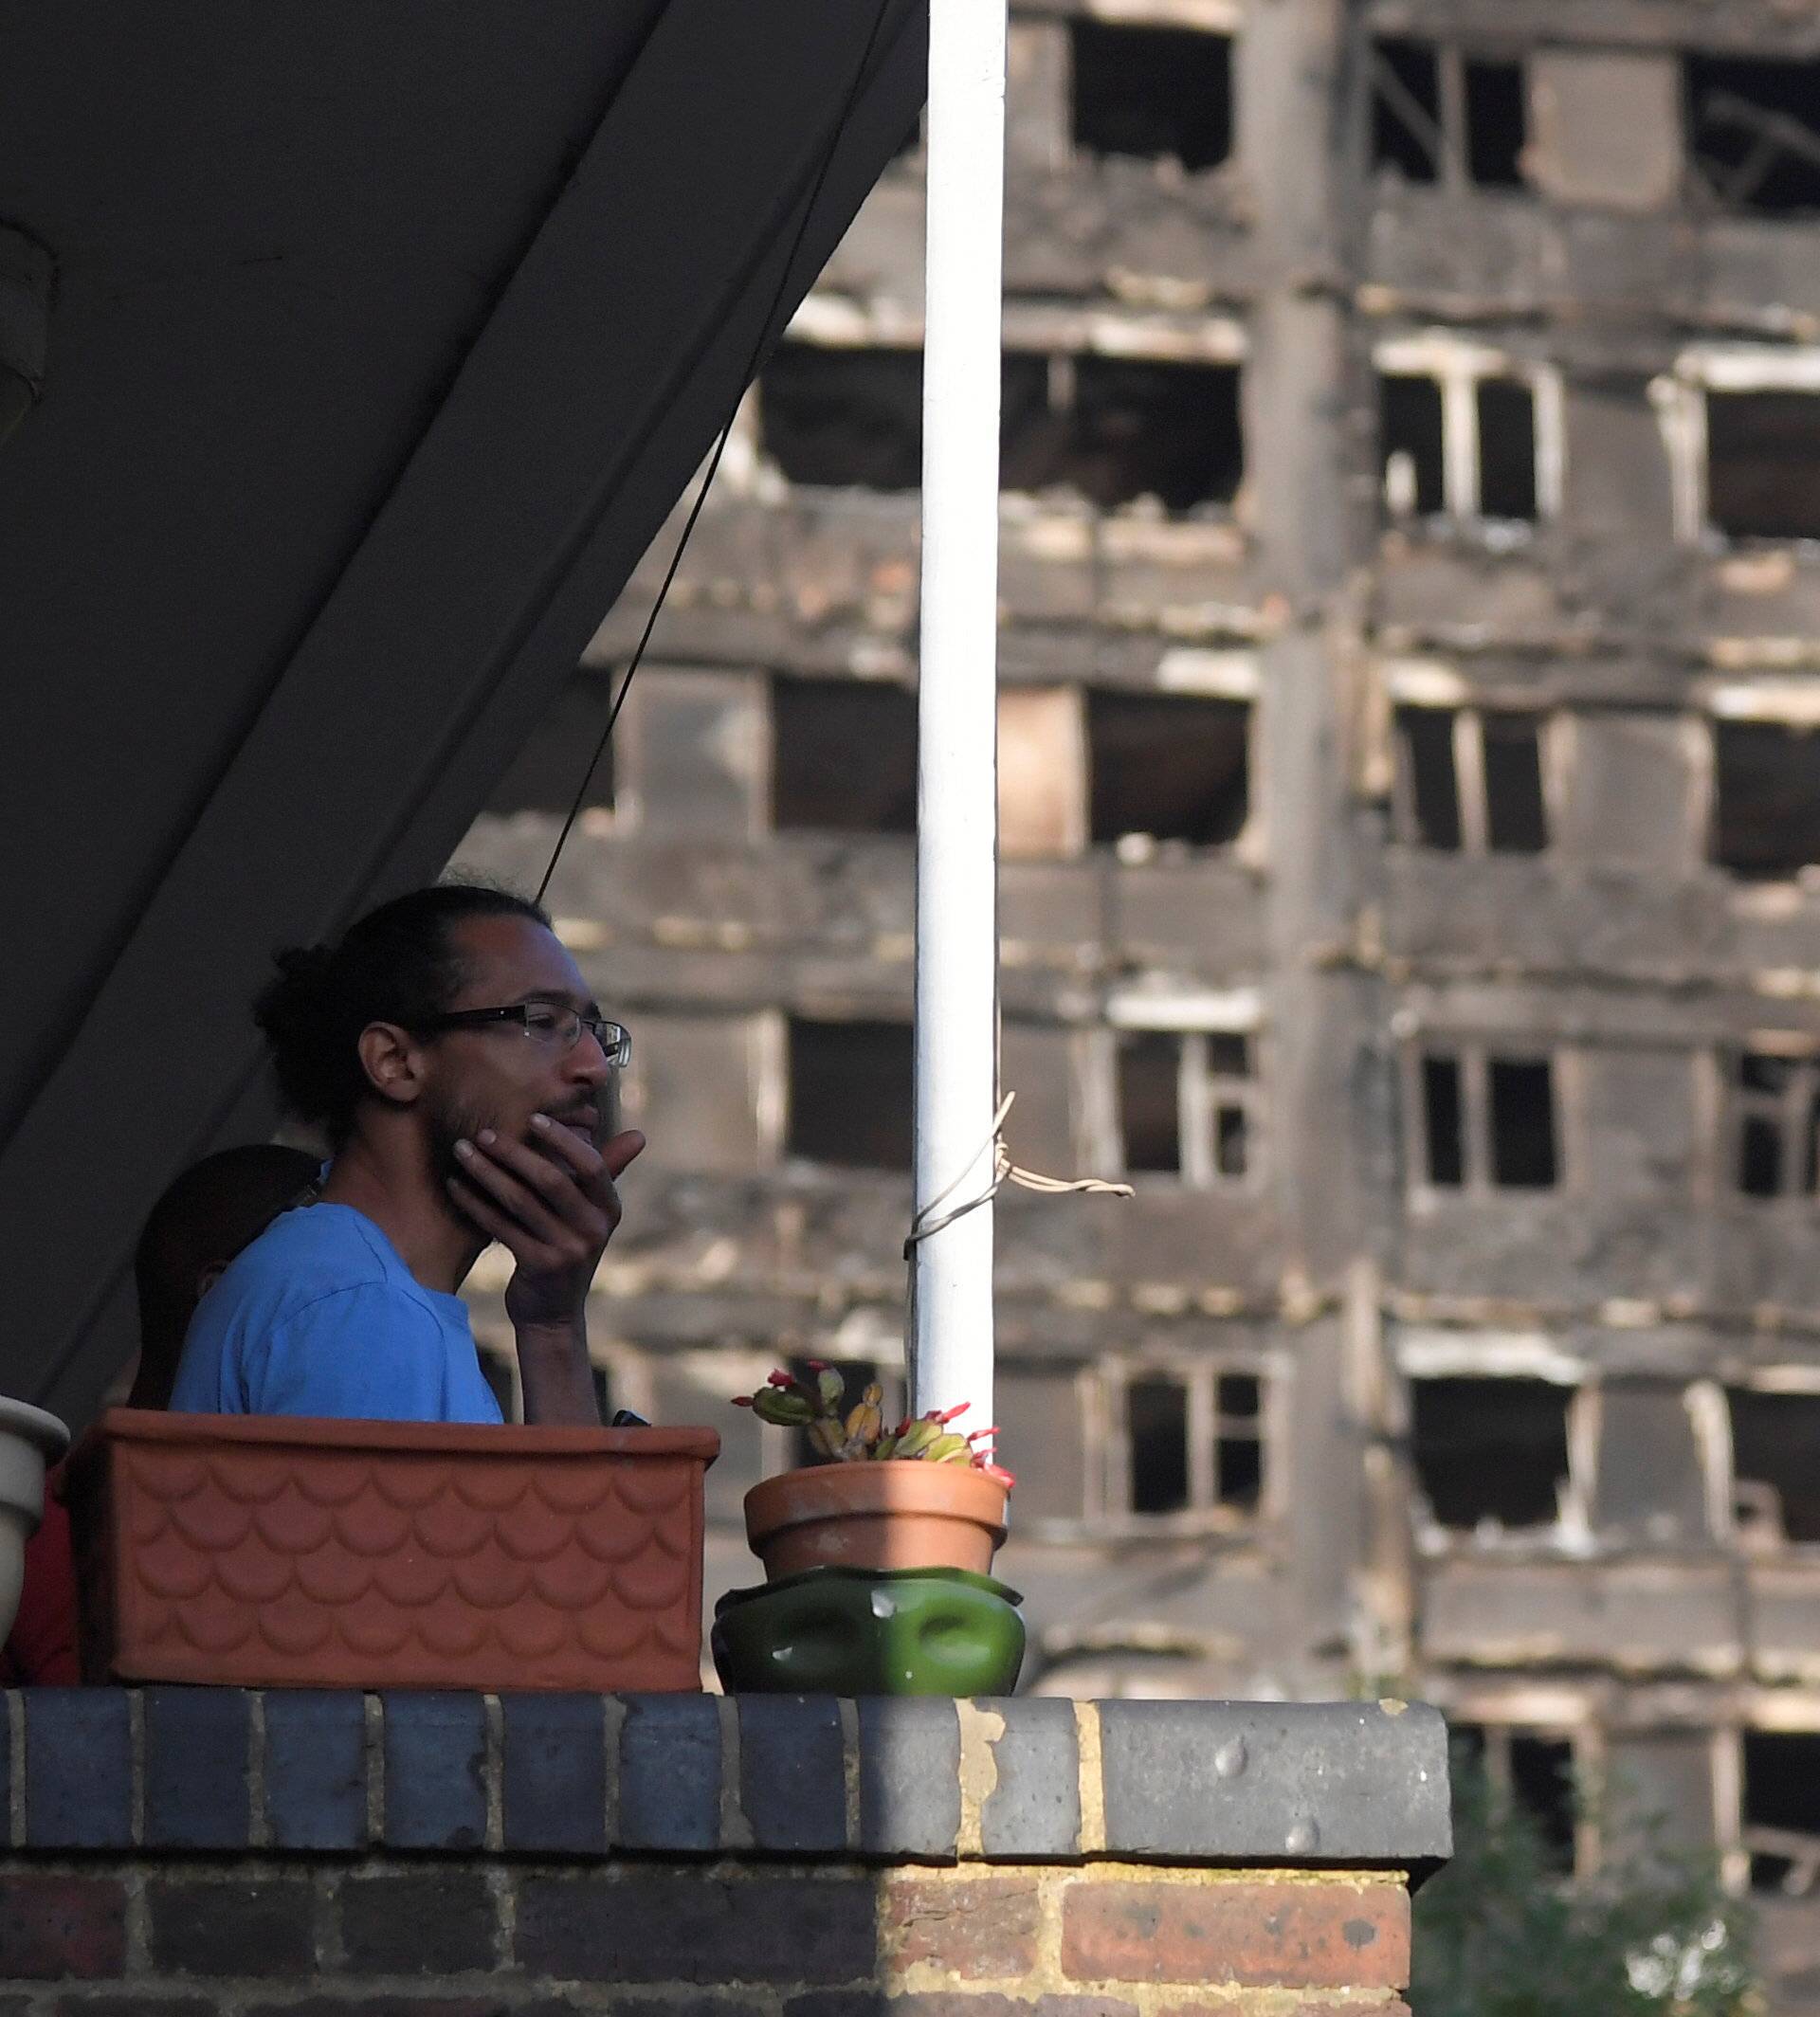 A man looks out from a balcony in front of the Grenfell Tower block that was destroyed in a fire, in north Kensington, West London